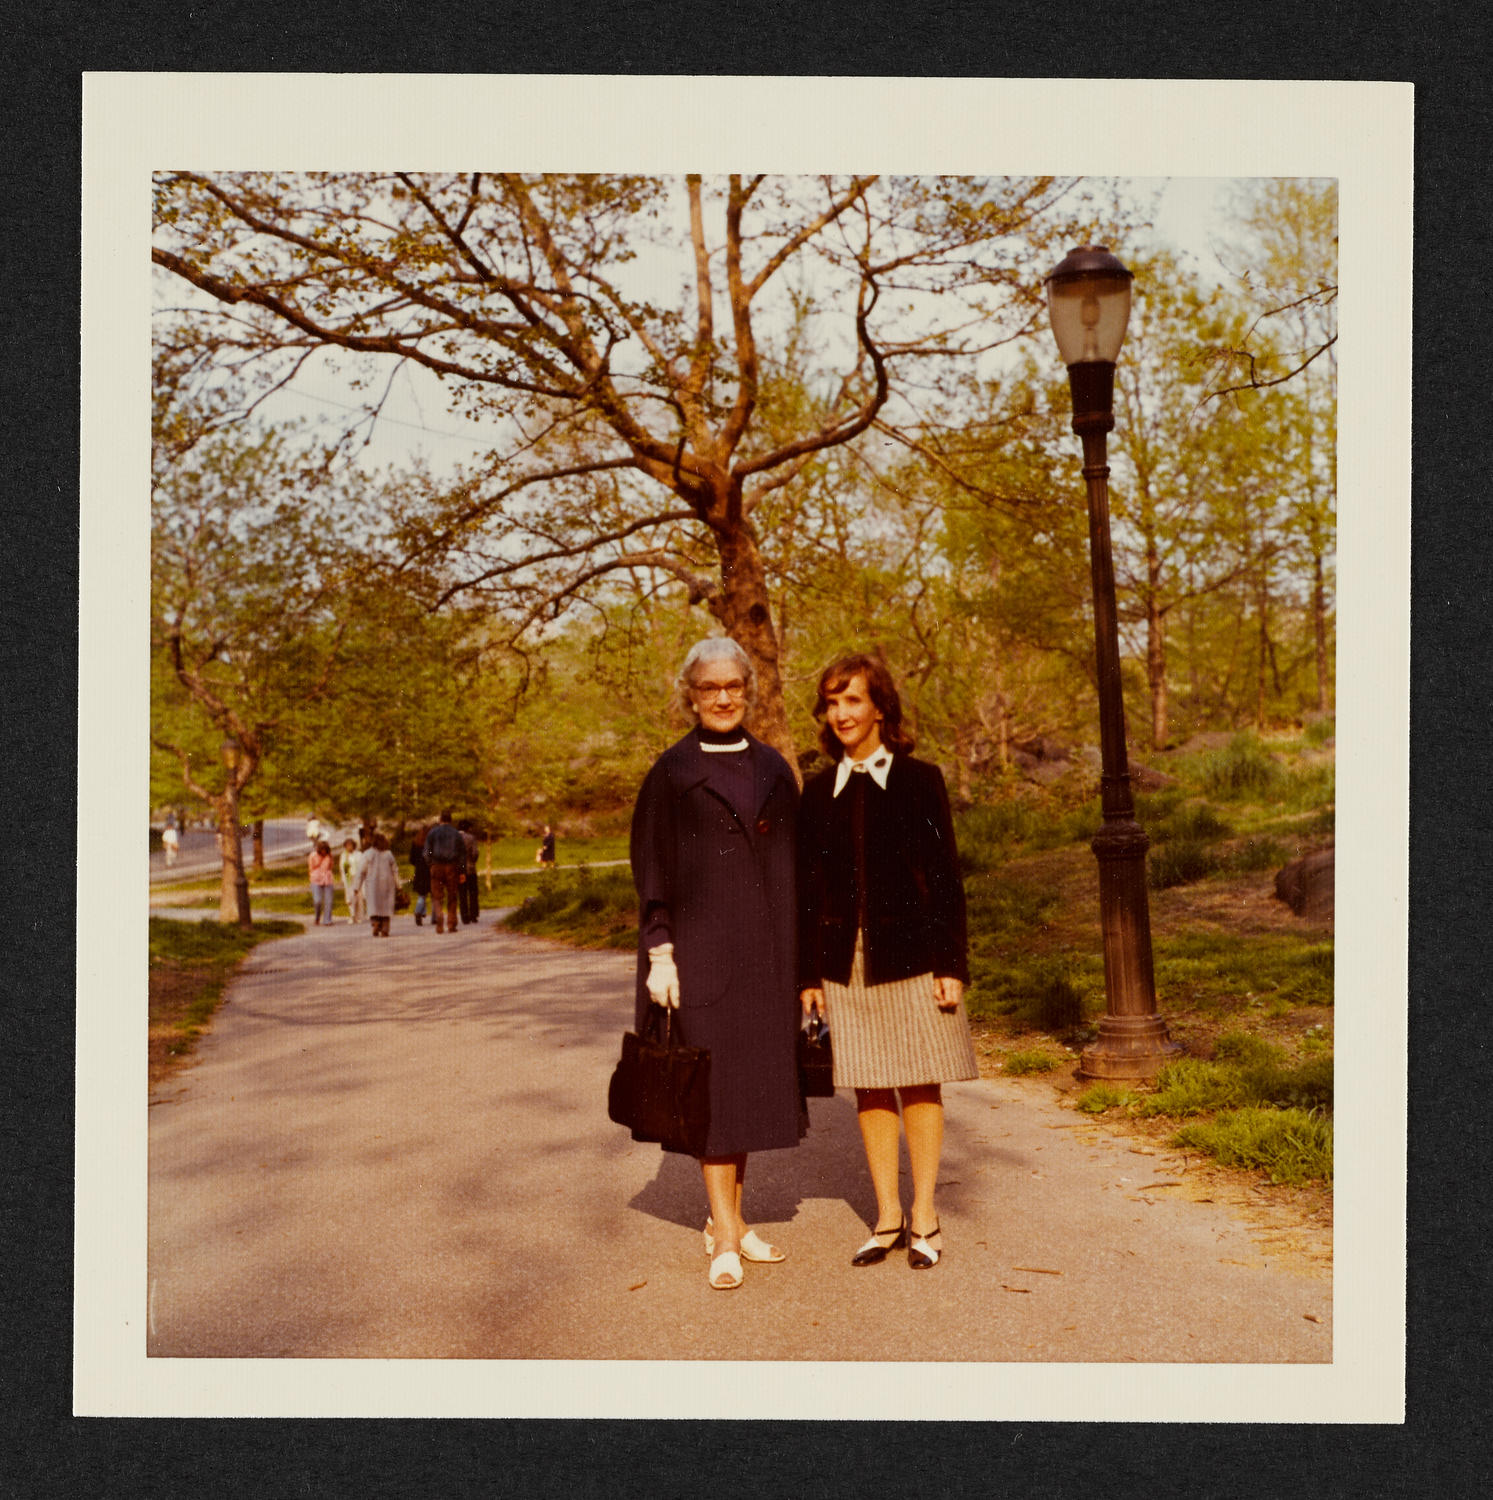 Lisan Kay and Marianne Kochman in Central Park, May 10, 1975